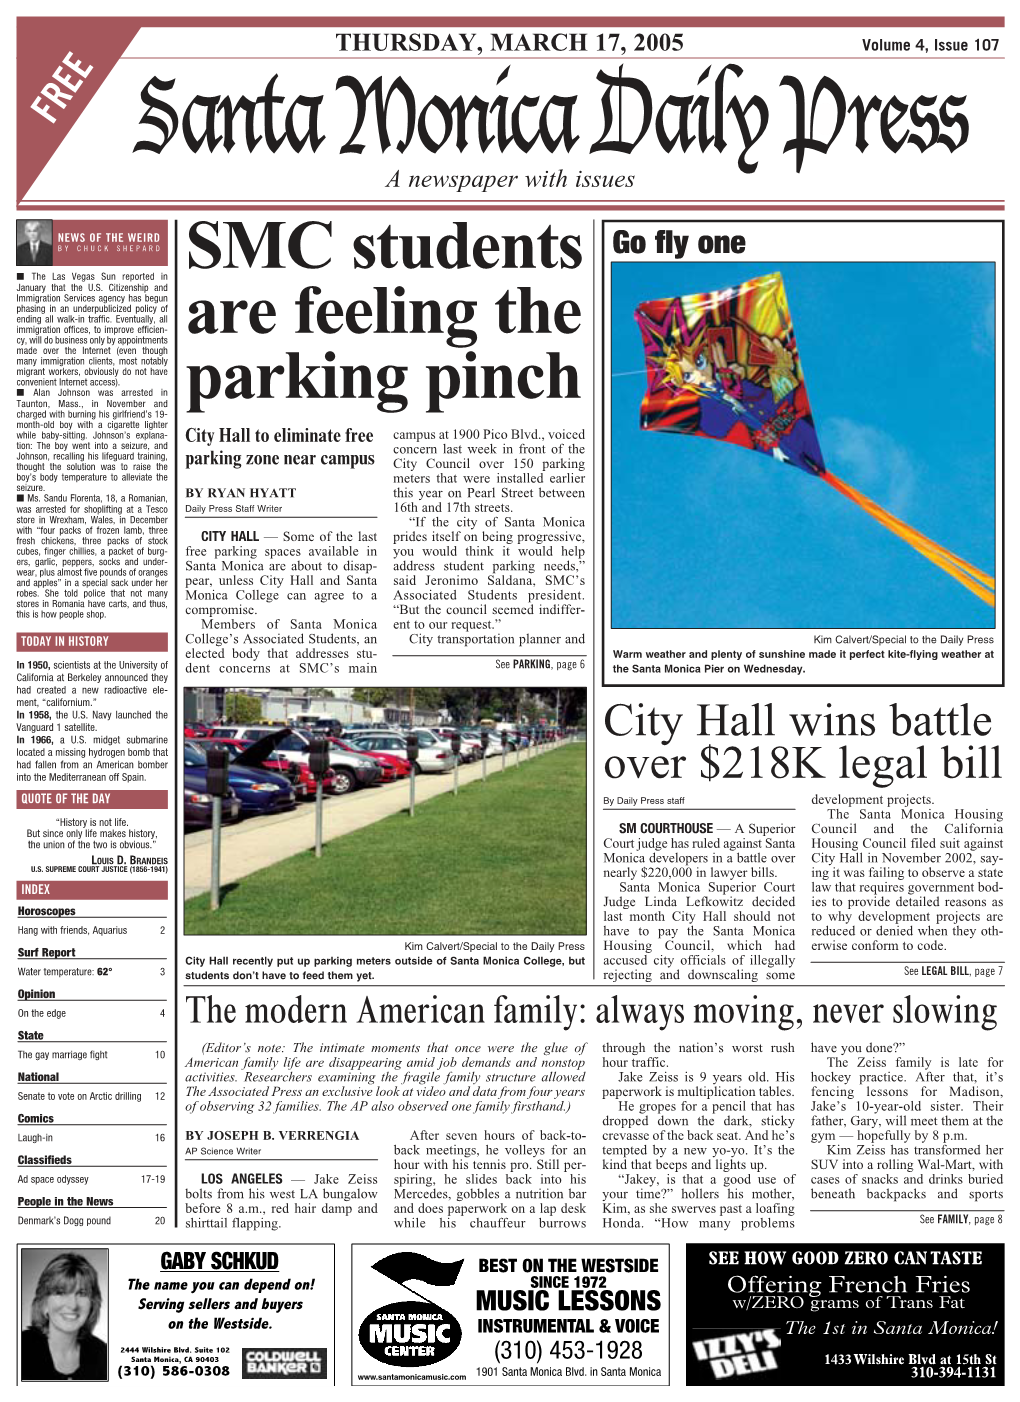 SMC Students Are Feeling the Parking Pinch